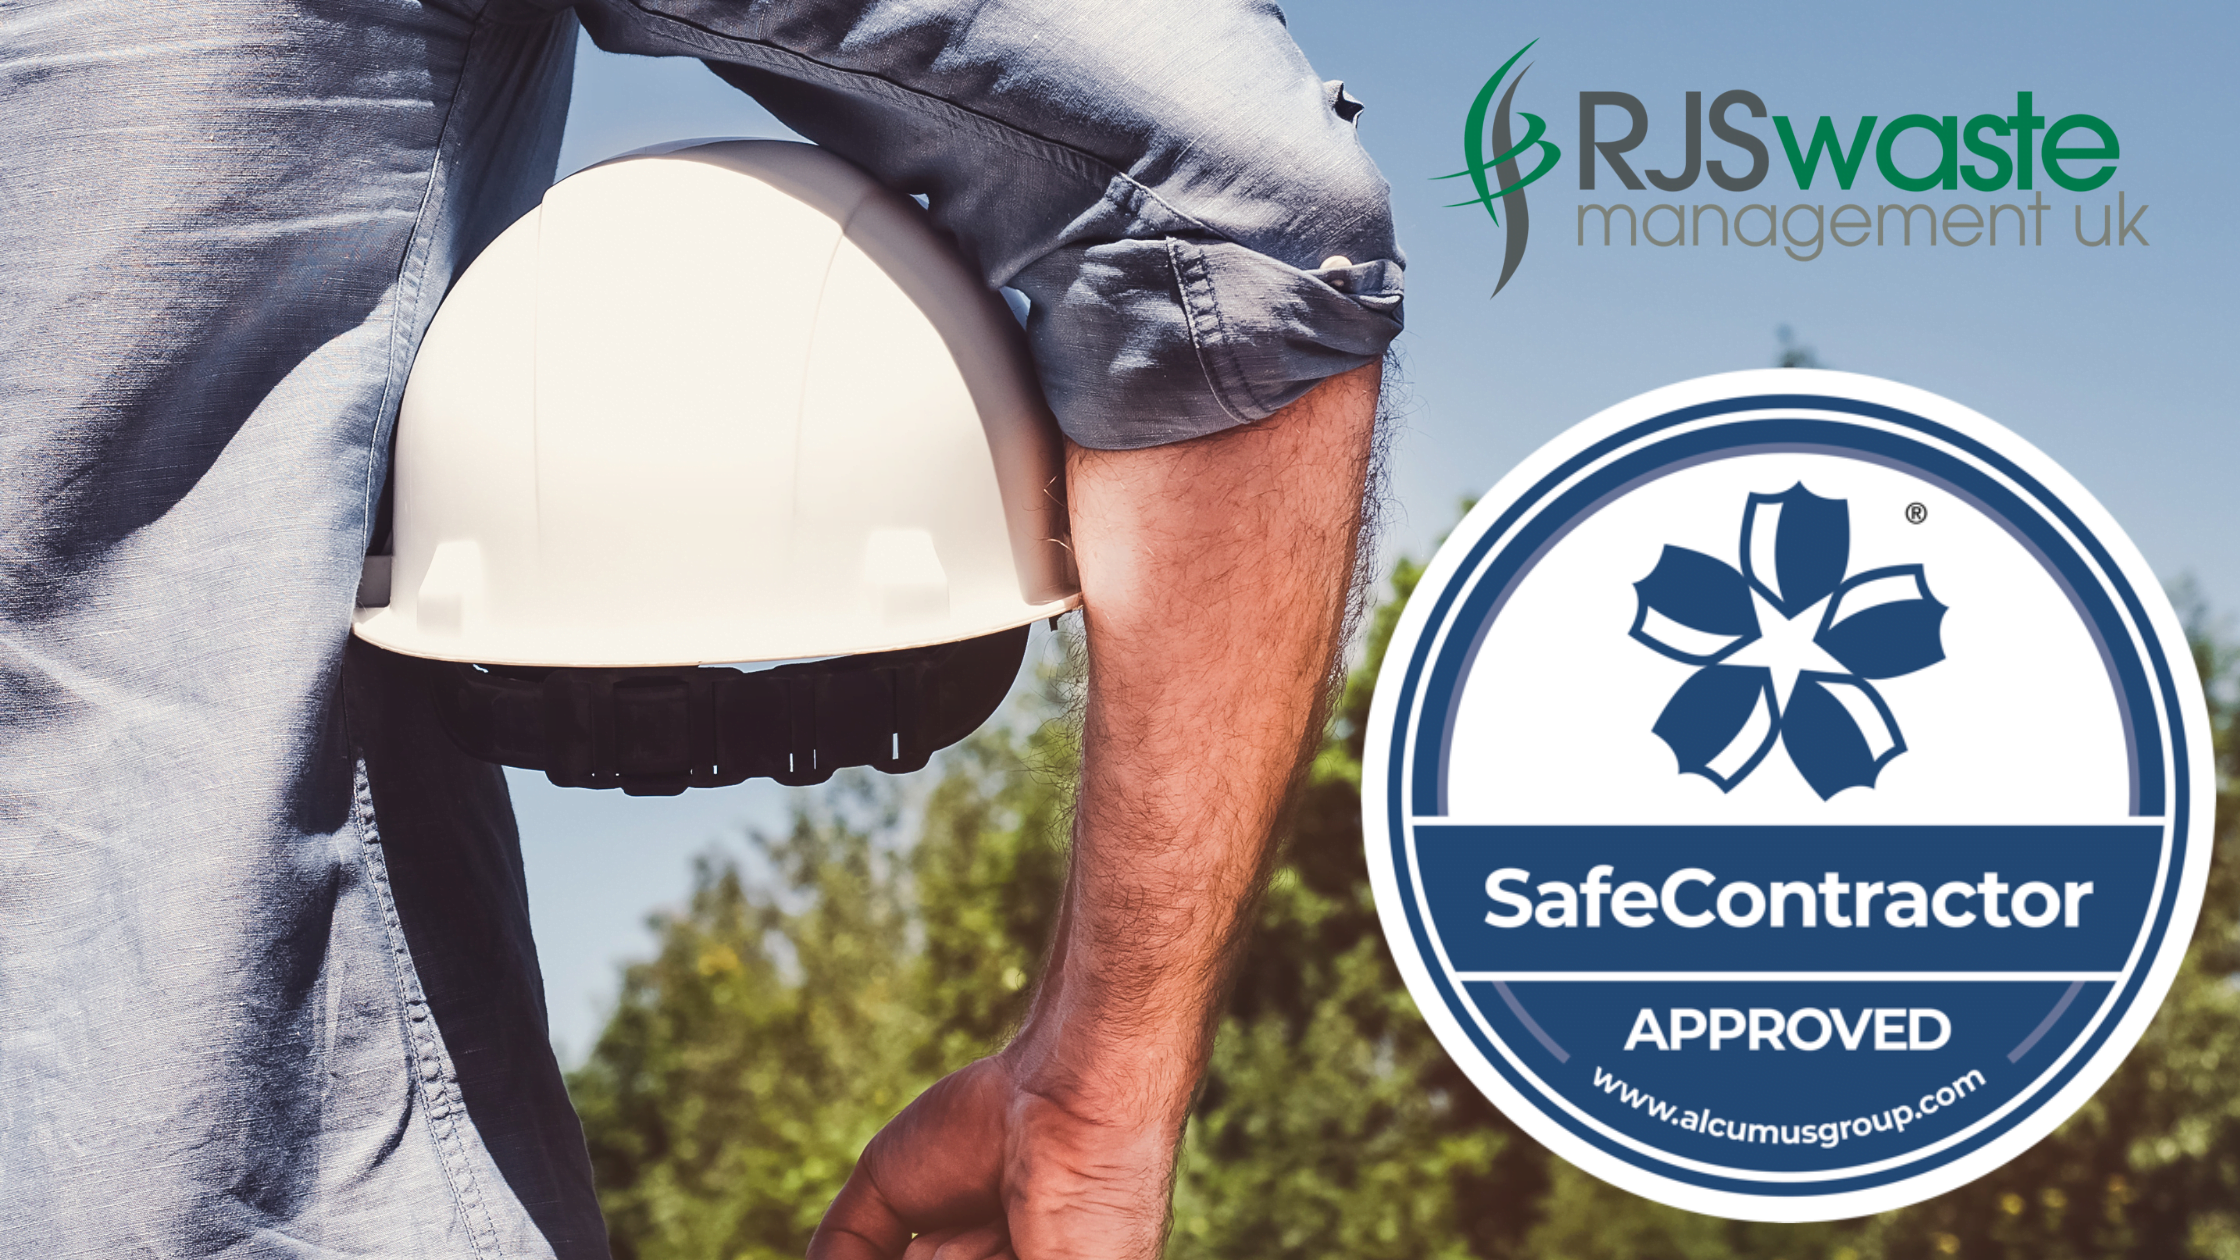 SafeContractor and RJS Waste Management logos next to a man holding a white hard hat